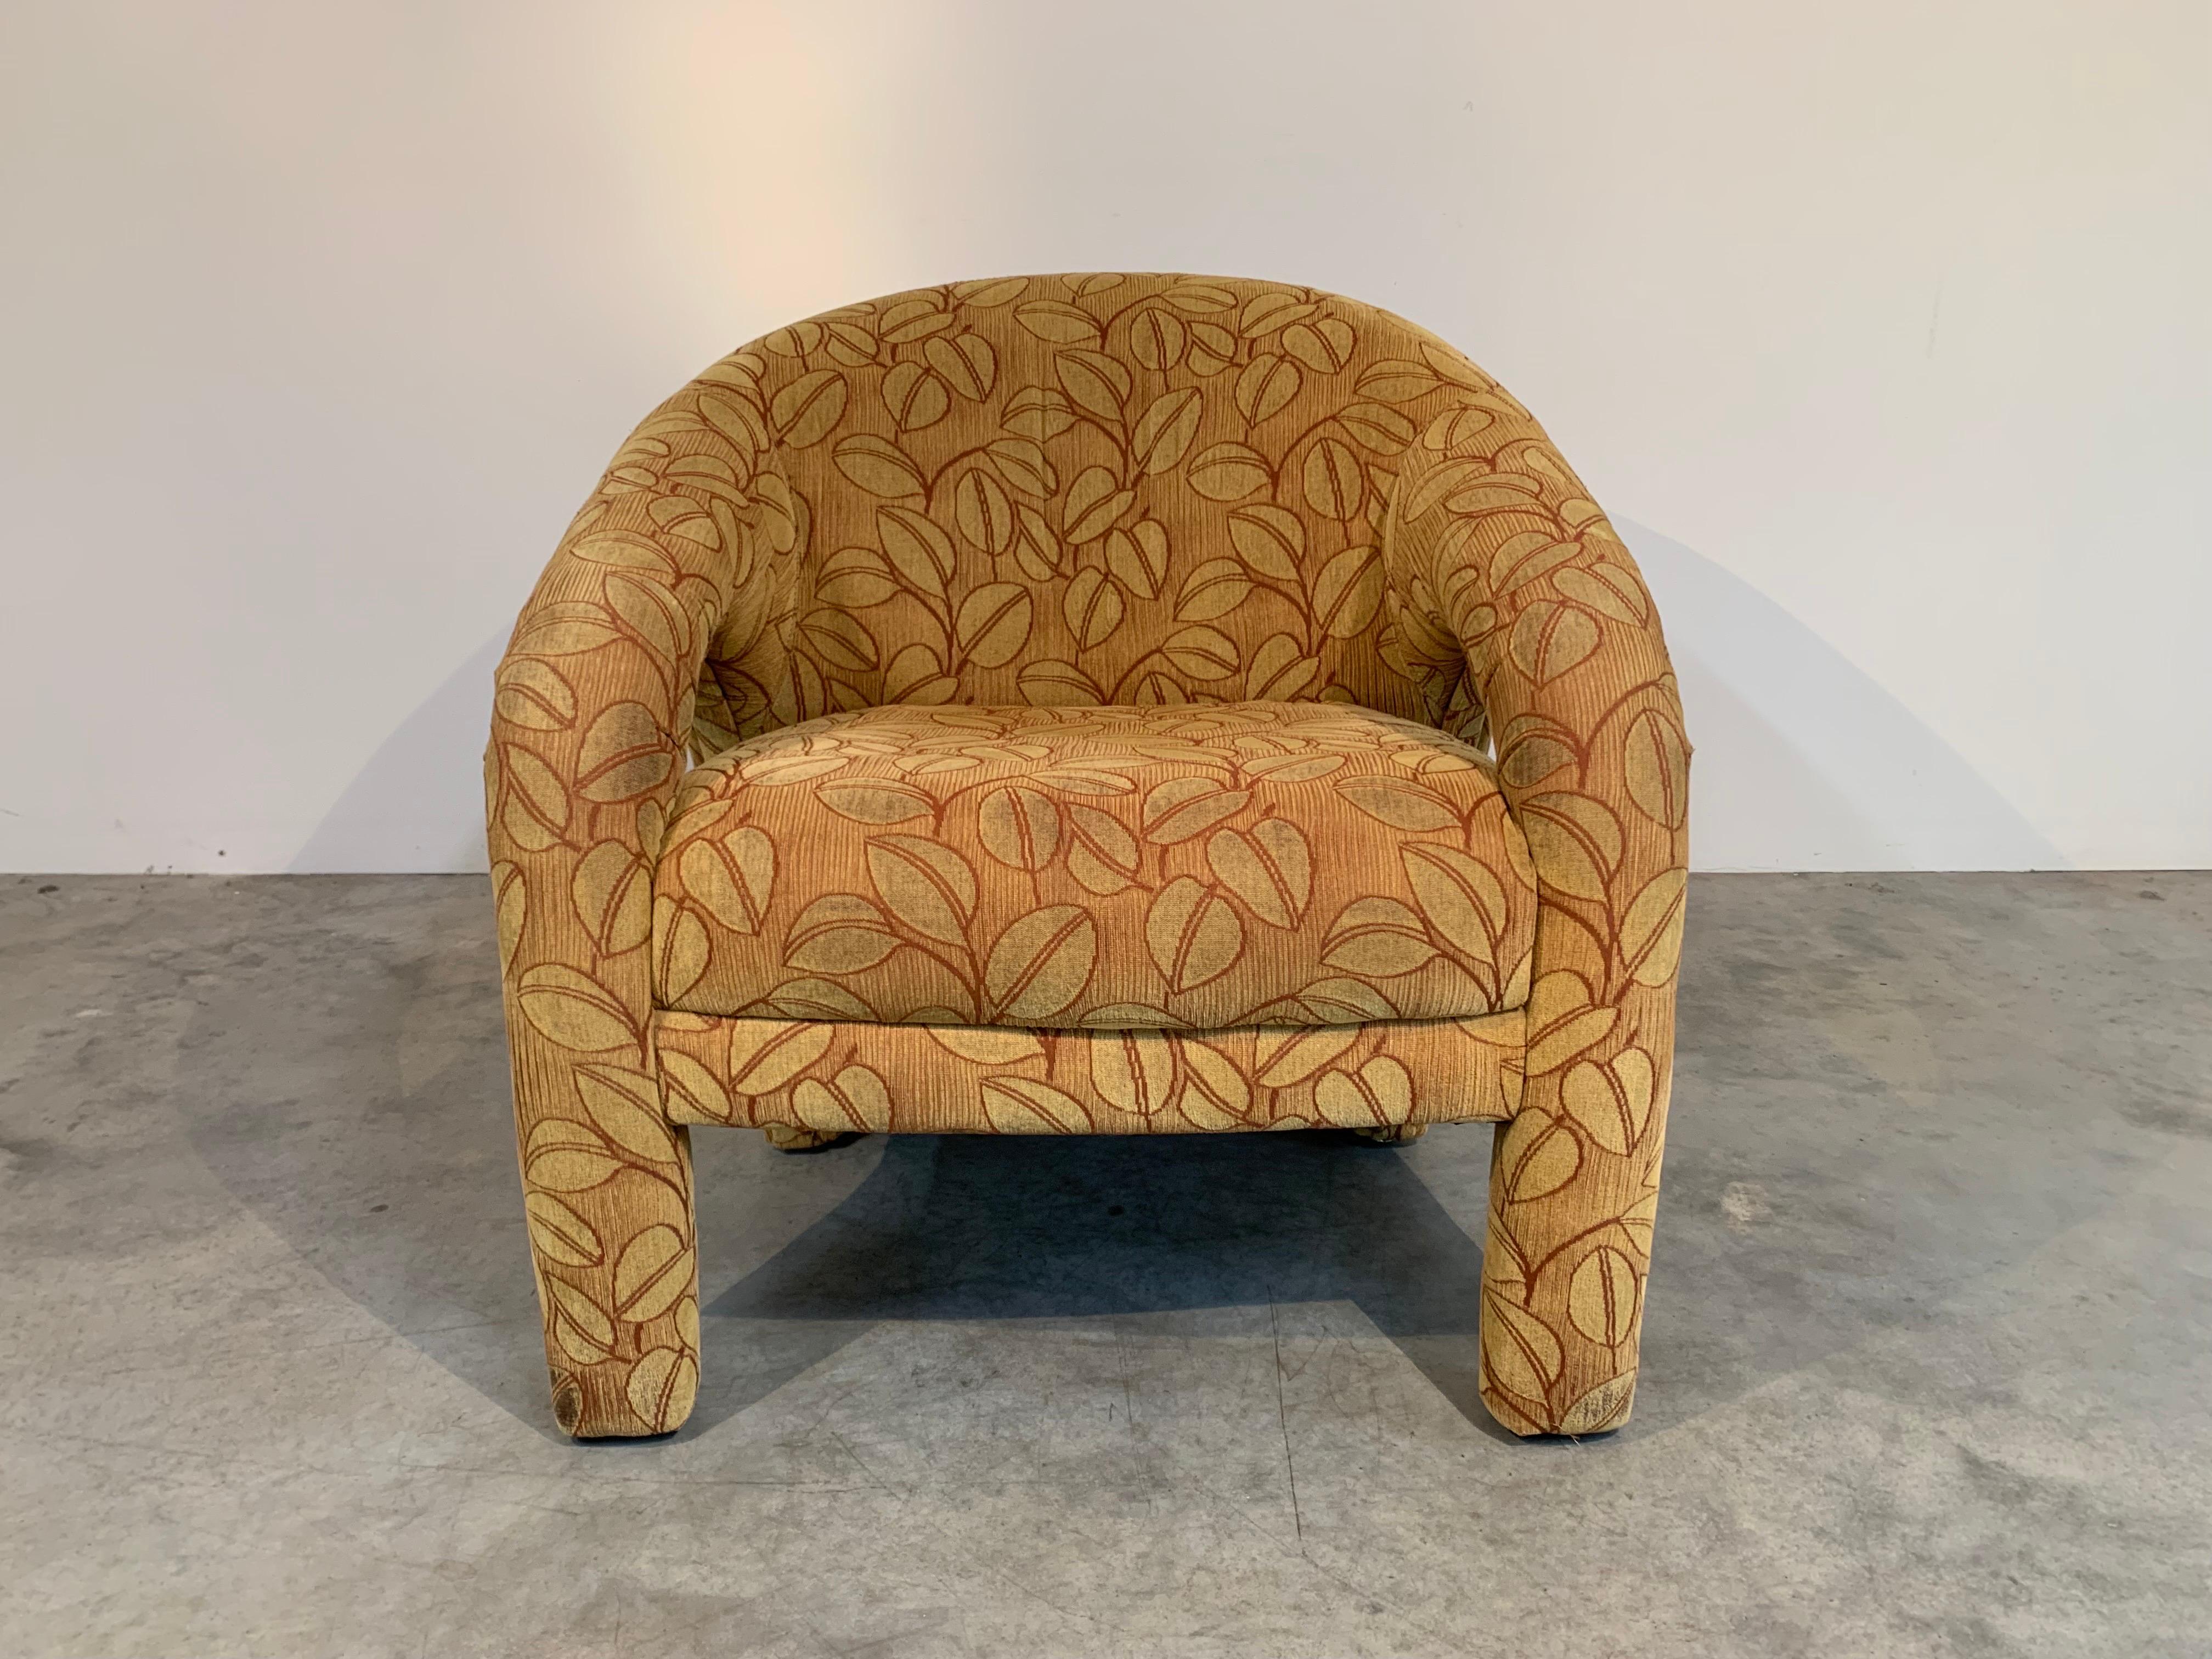 Handsome 'Elephant' chair by Weiman in the manner of Vladimir Kagan. 
Very nice vintage condition having minor ware to the armrests. Ready for your customization. 
Chair is clean, super soft and ready for use.